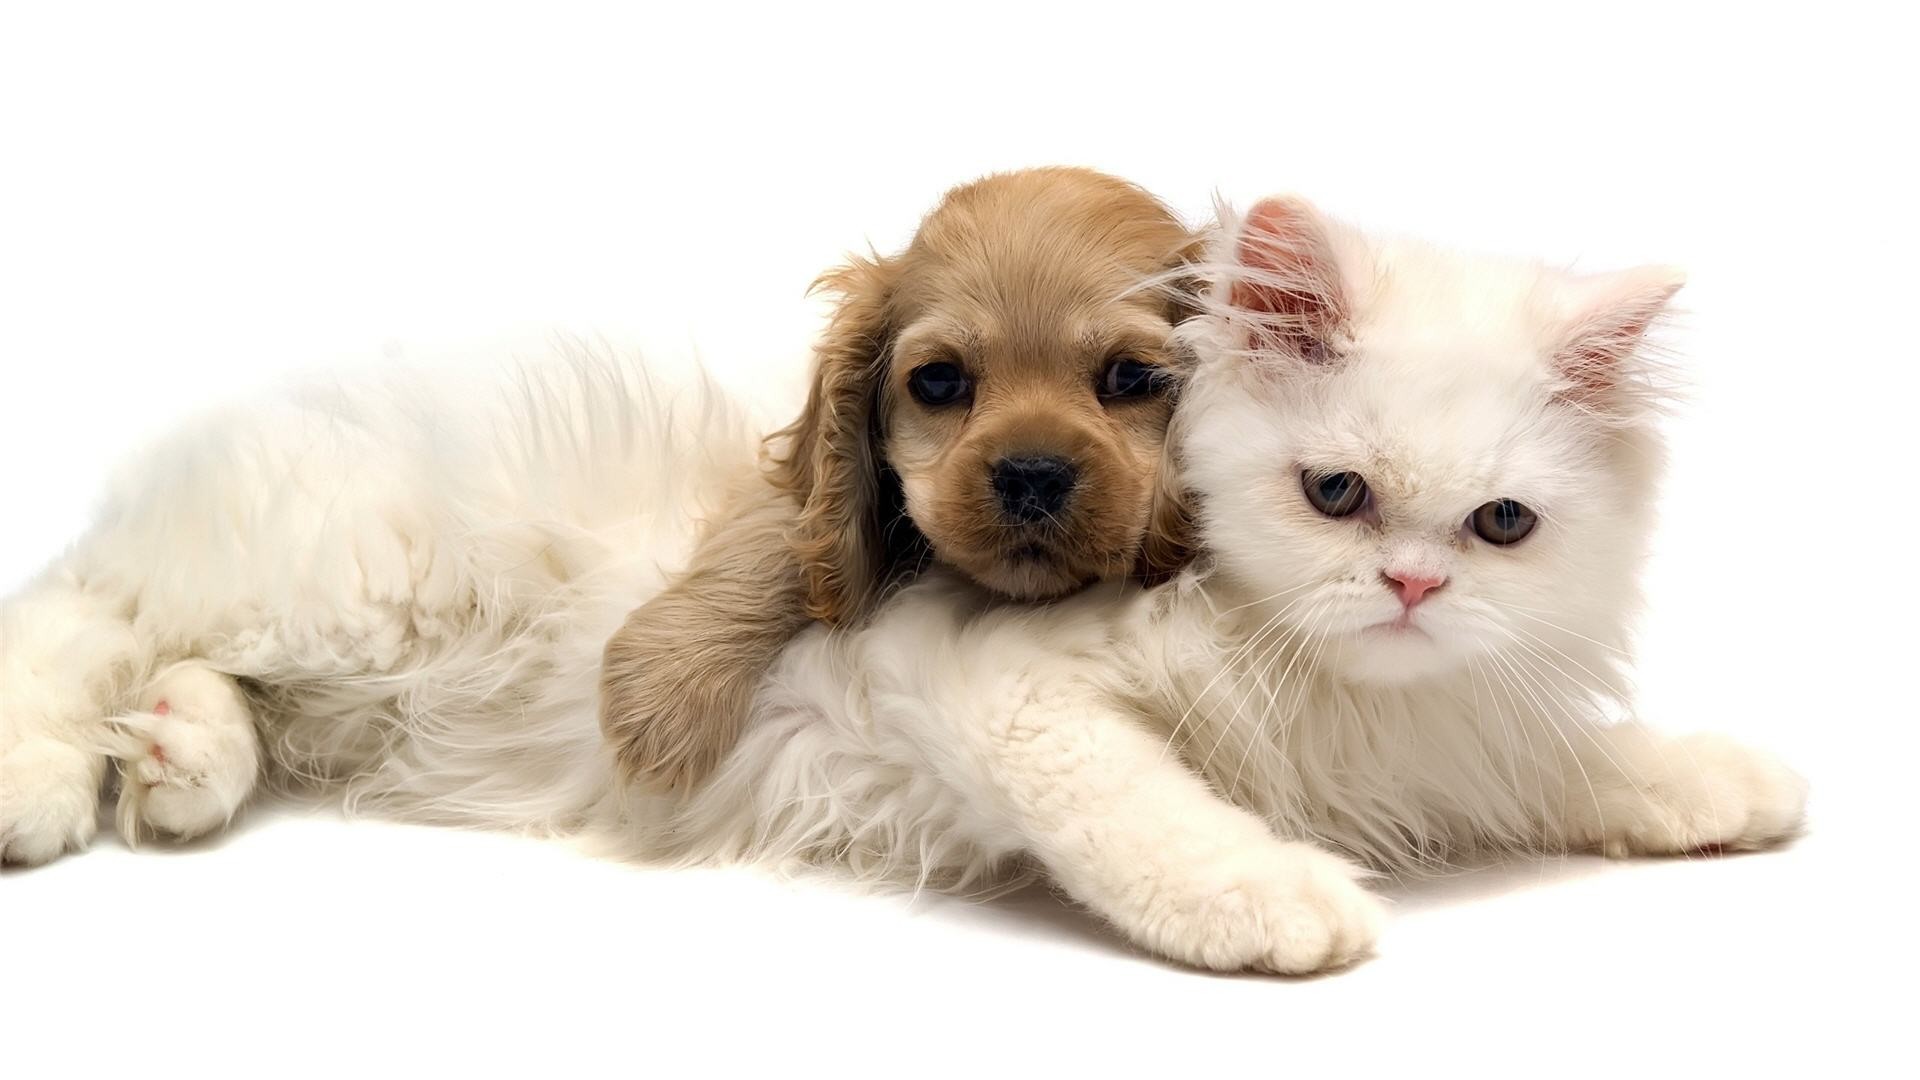 Adorable Cat And Dog Wallpaper - Cute Cats With Dogs - HD Wallpaper 